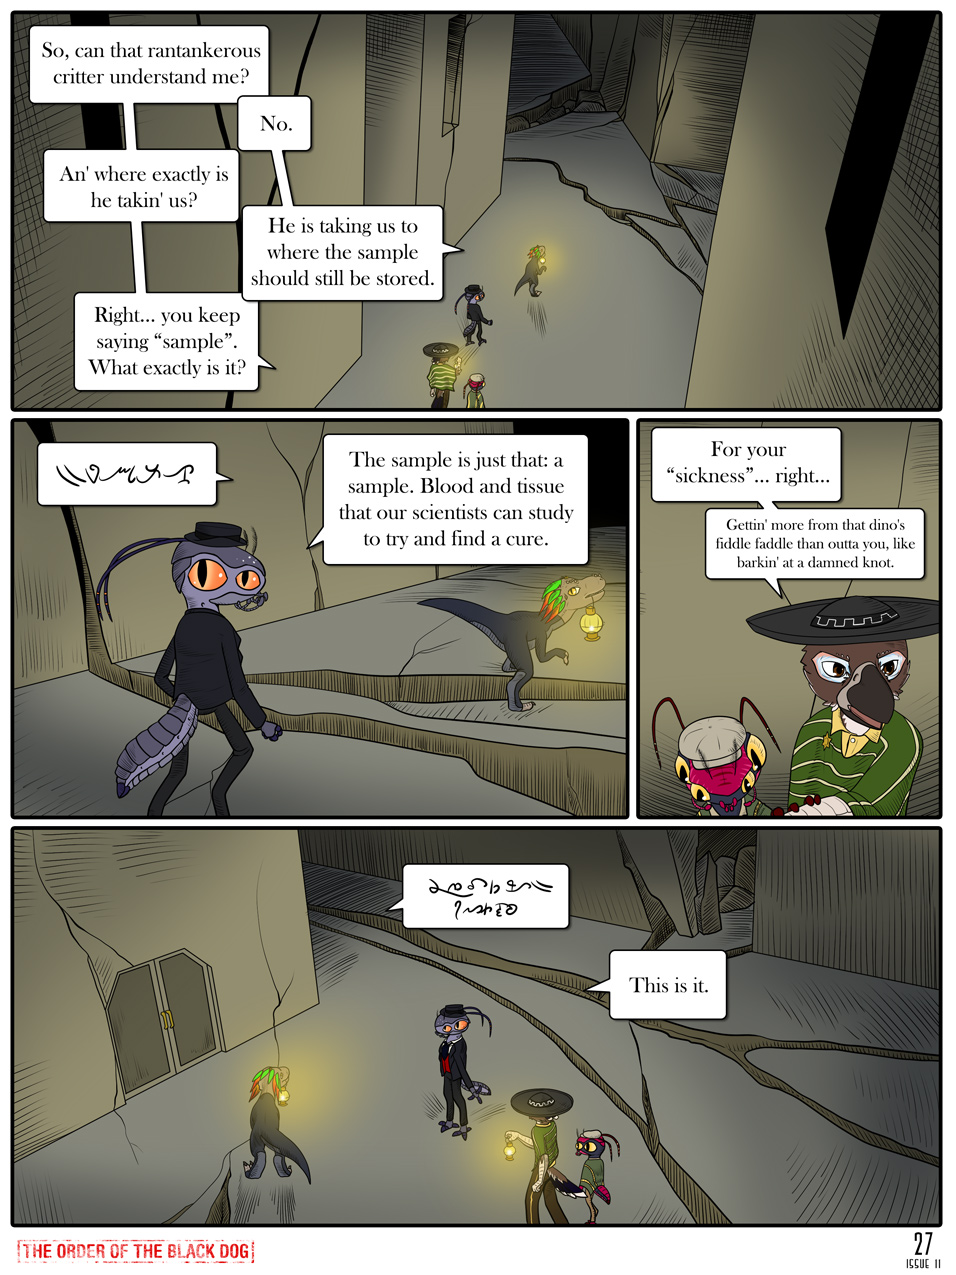 Issue 11, Page 27